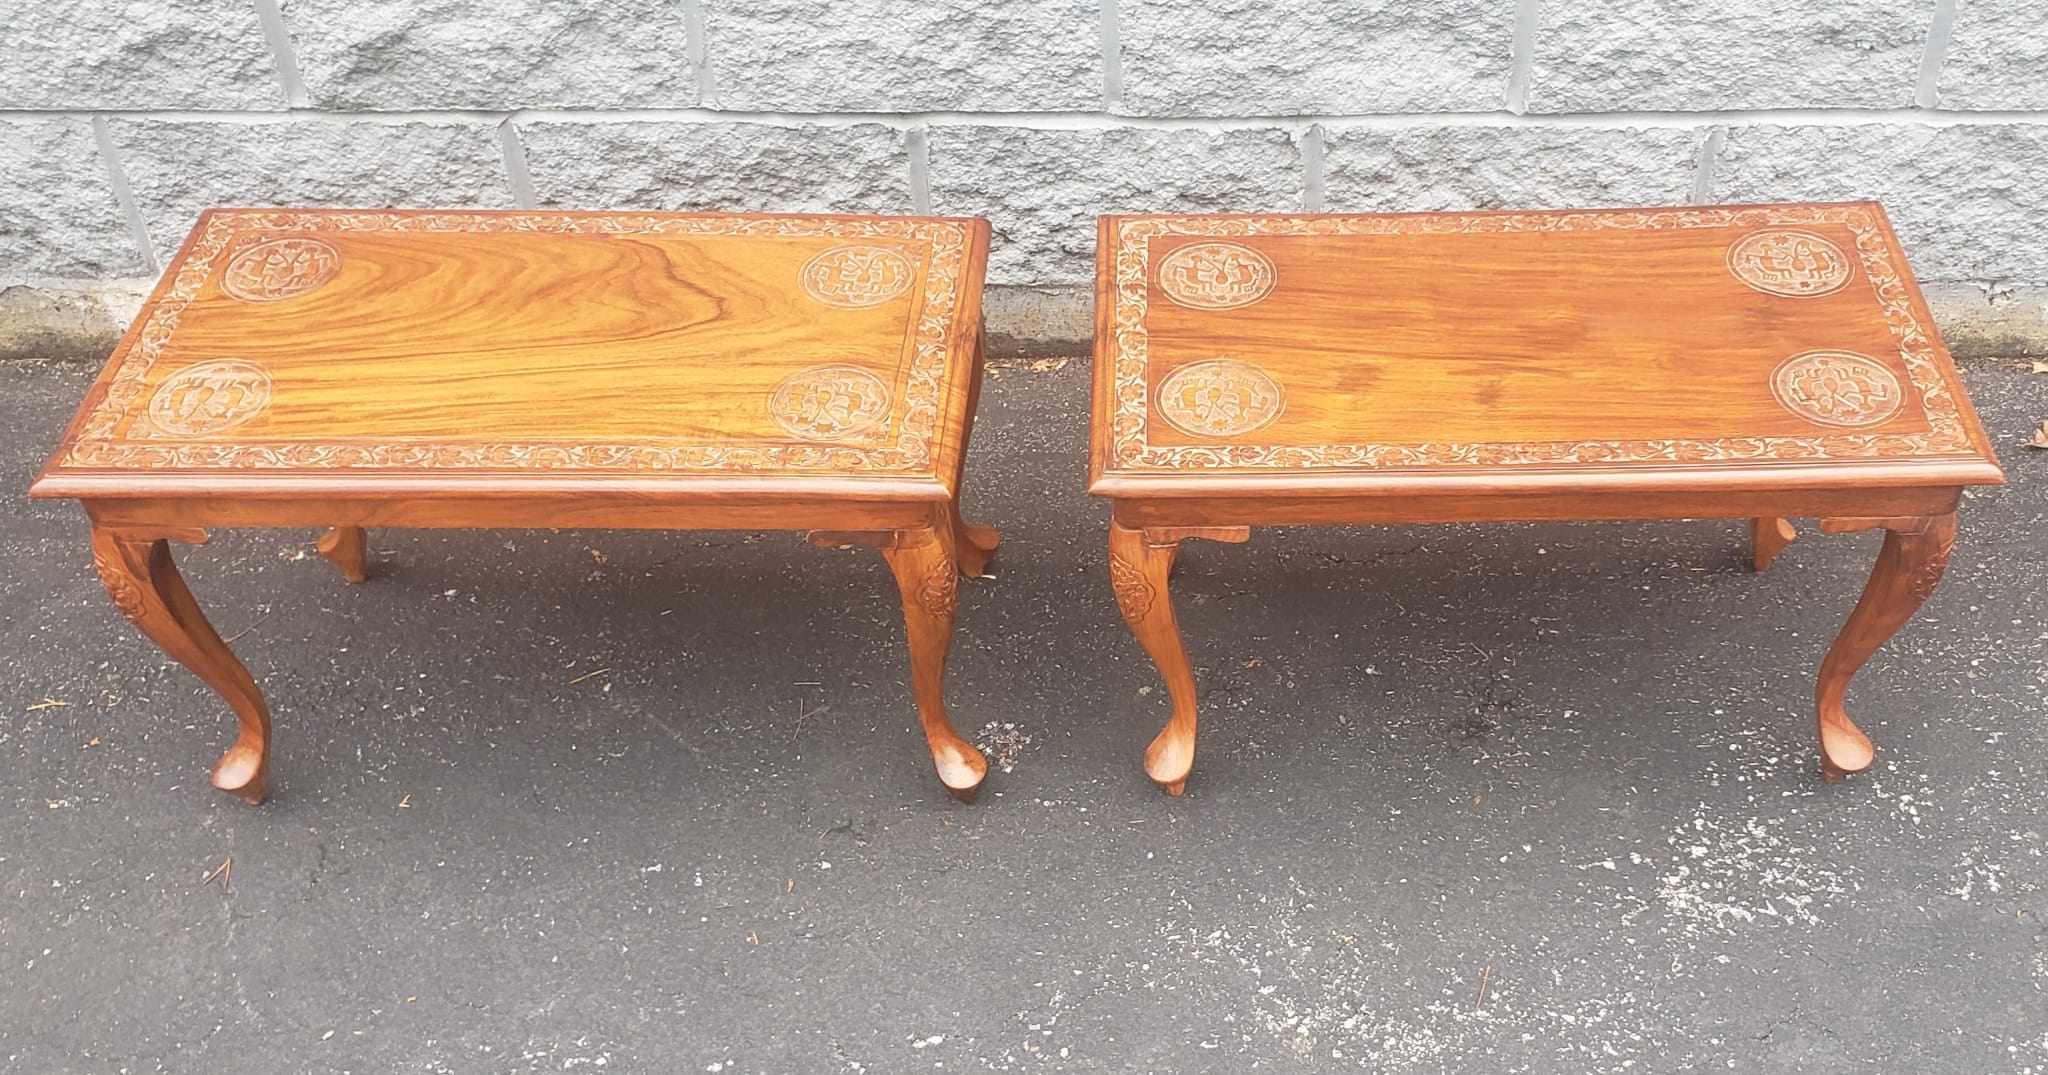 A pair of midcentury Anglo-Japanese Carved Hardwood Chabudai style Low Side Tables. 
The hardwood, possibly Indian rosewood has beautiful grai and shows great. Tables are 15.75